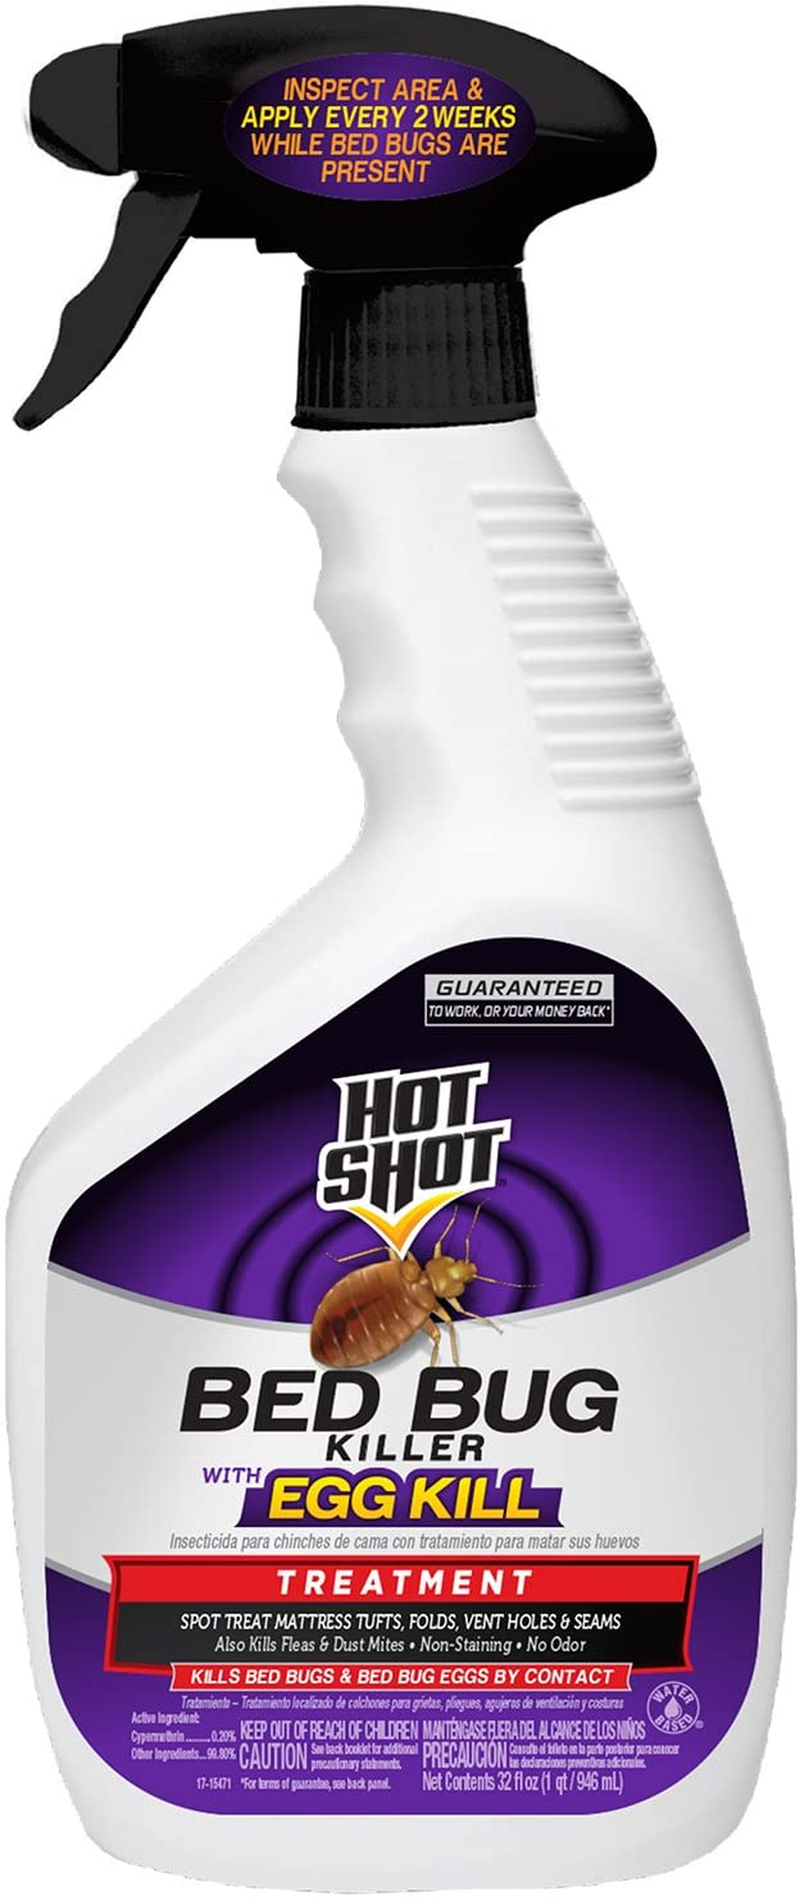 Hot Shot 96441 HG-96441 32 Oz Ready-To-Use Bed Bug Home Insect Killer, Multicolor